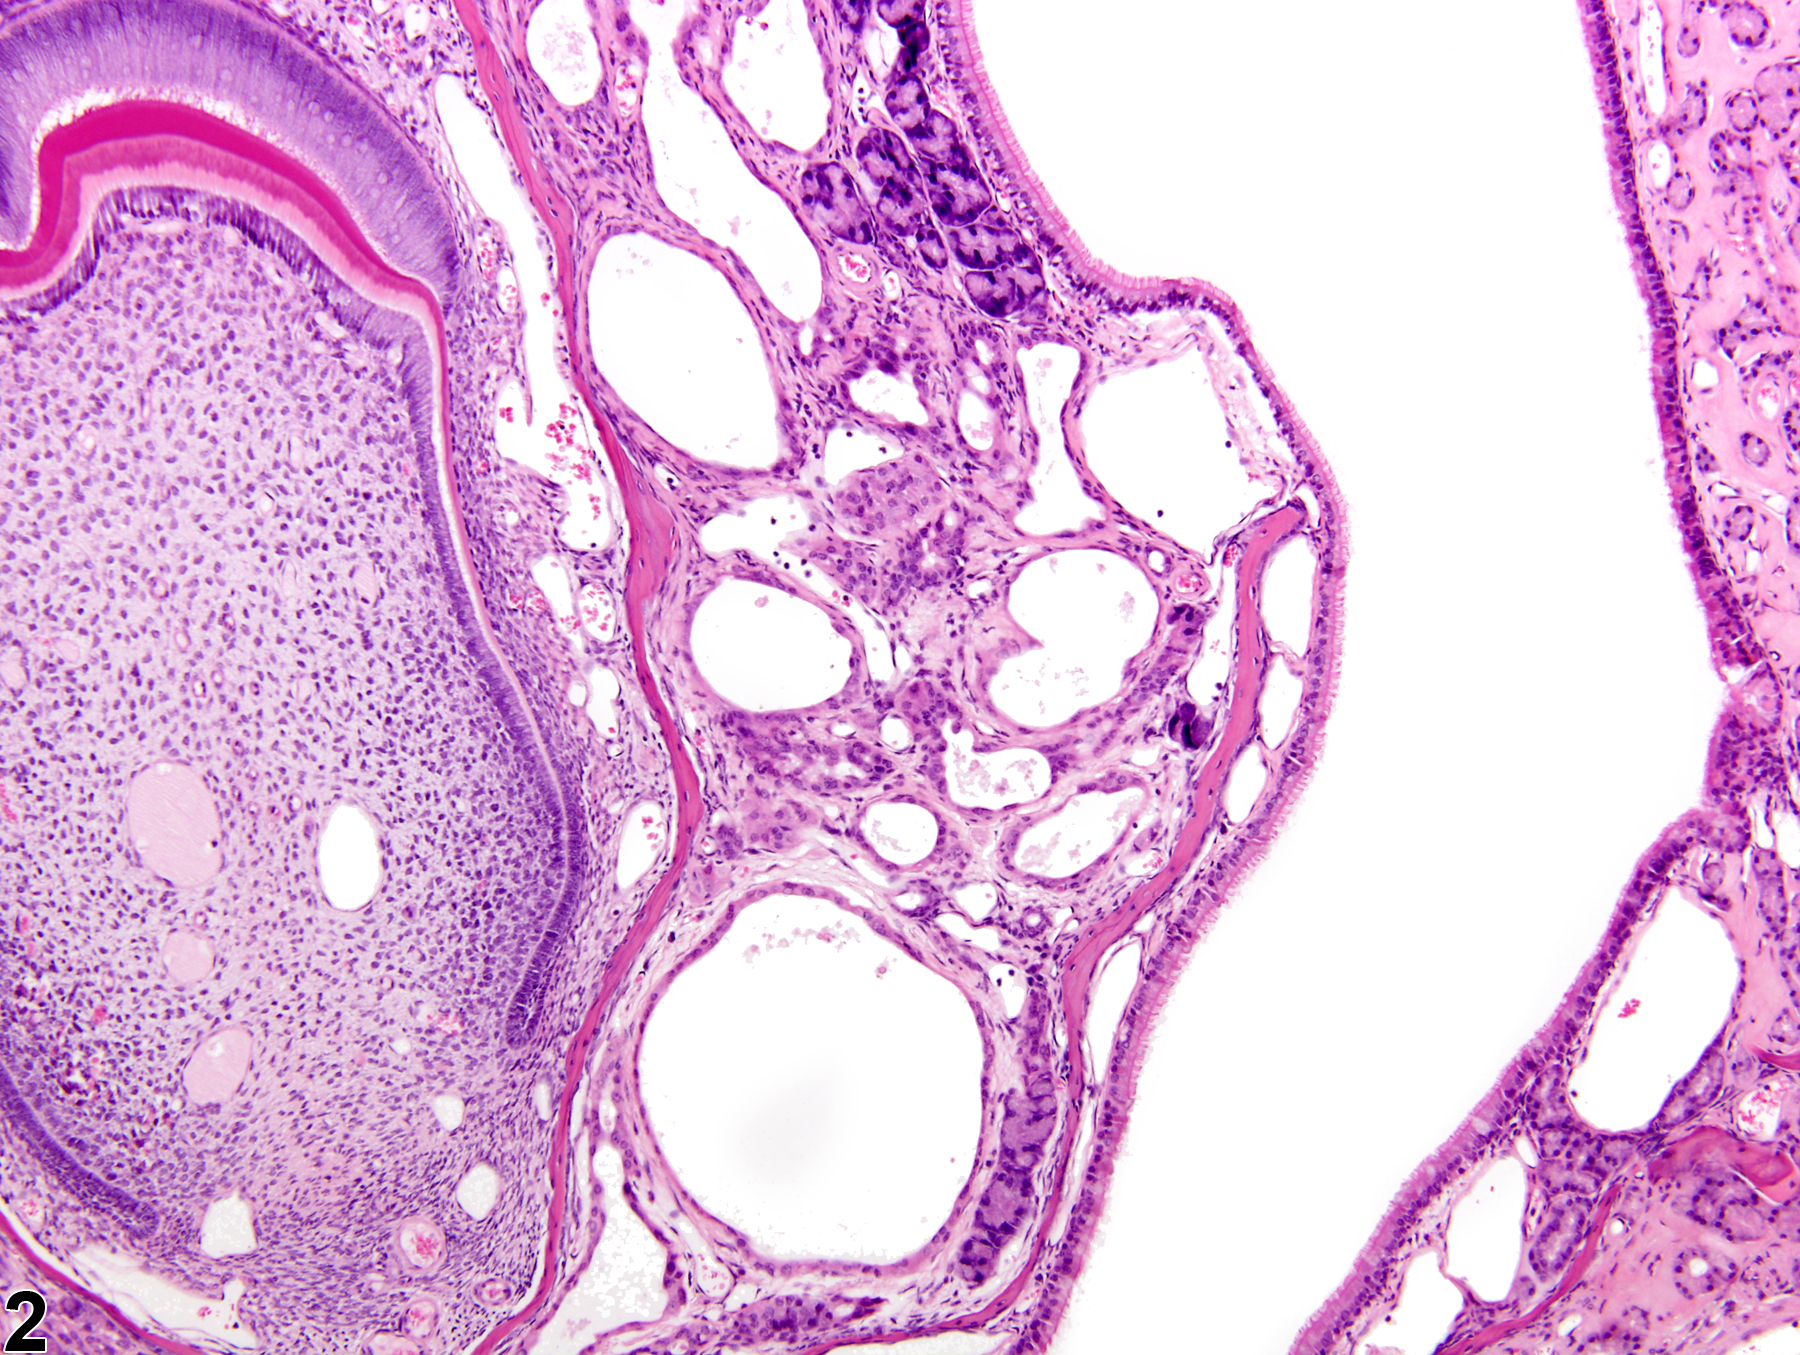 Image of dilation in the nose, respiratory epithelium, glands from a male B6C3F1/N mouse in a chronic study